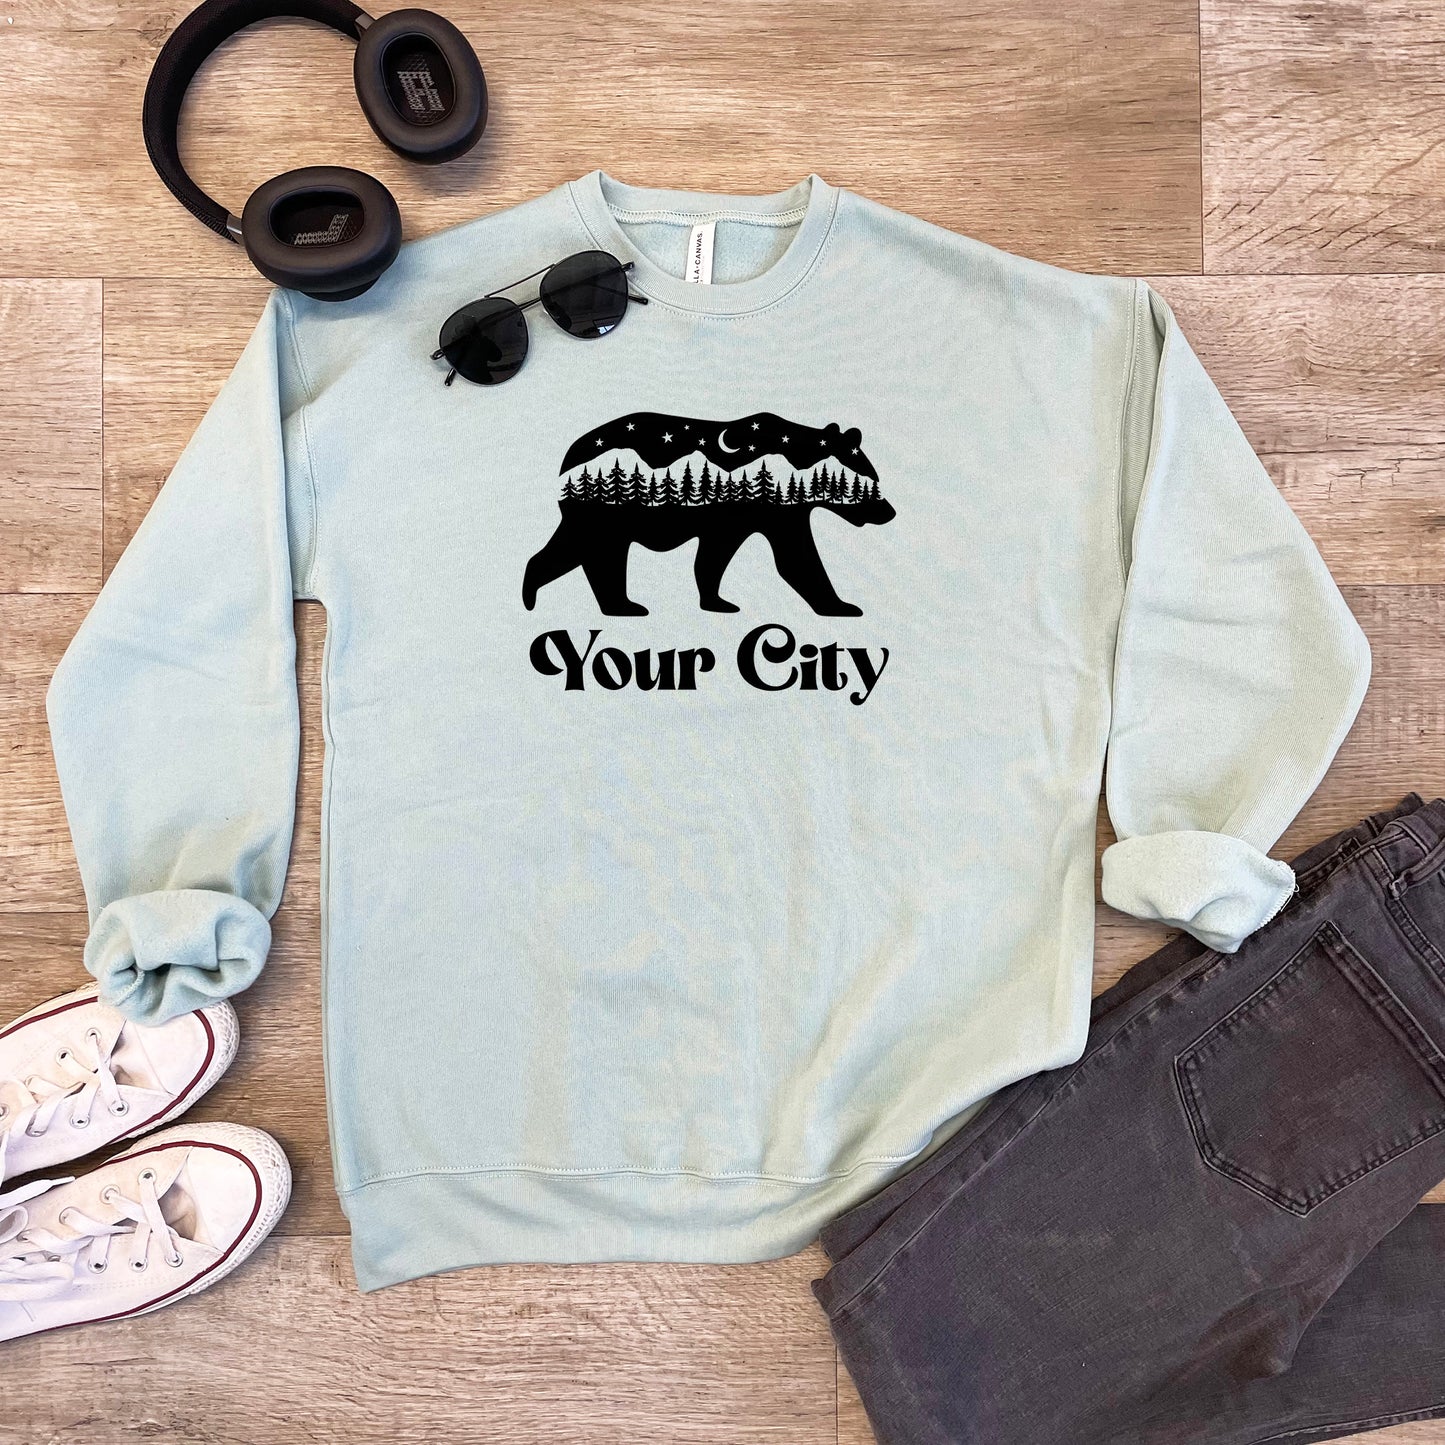 a sweater that says your city with a bear on it